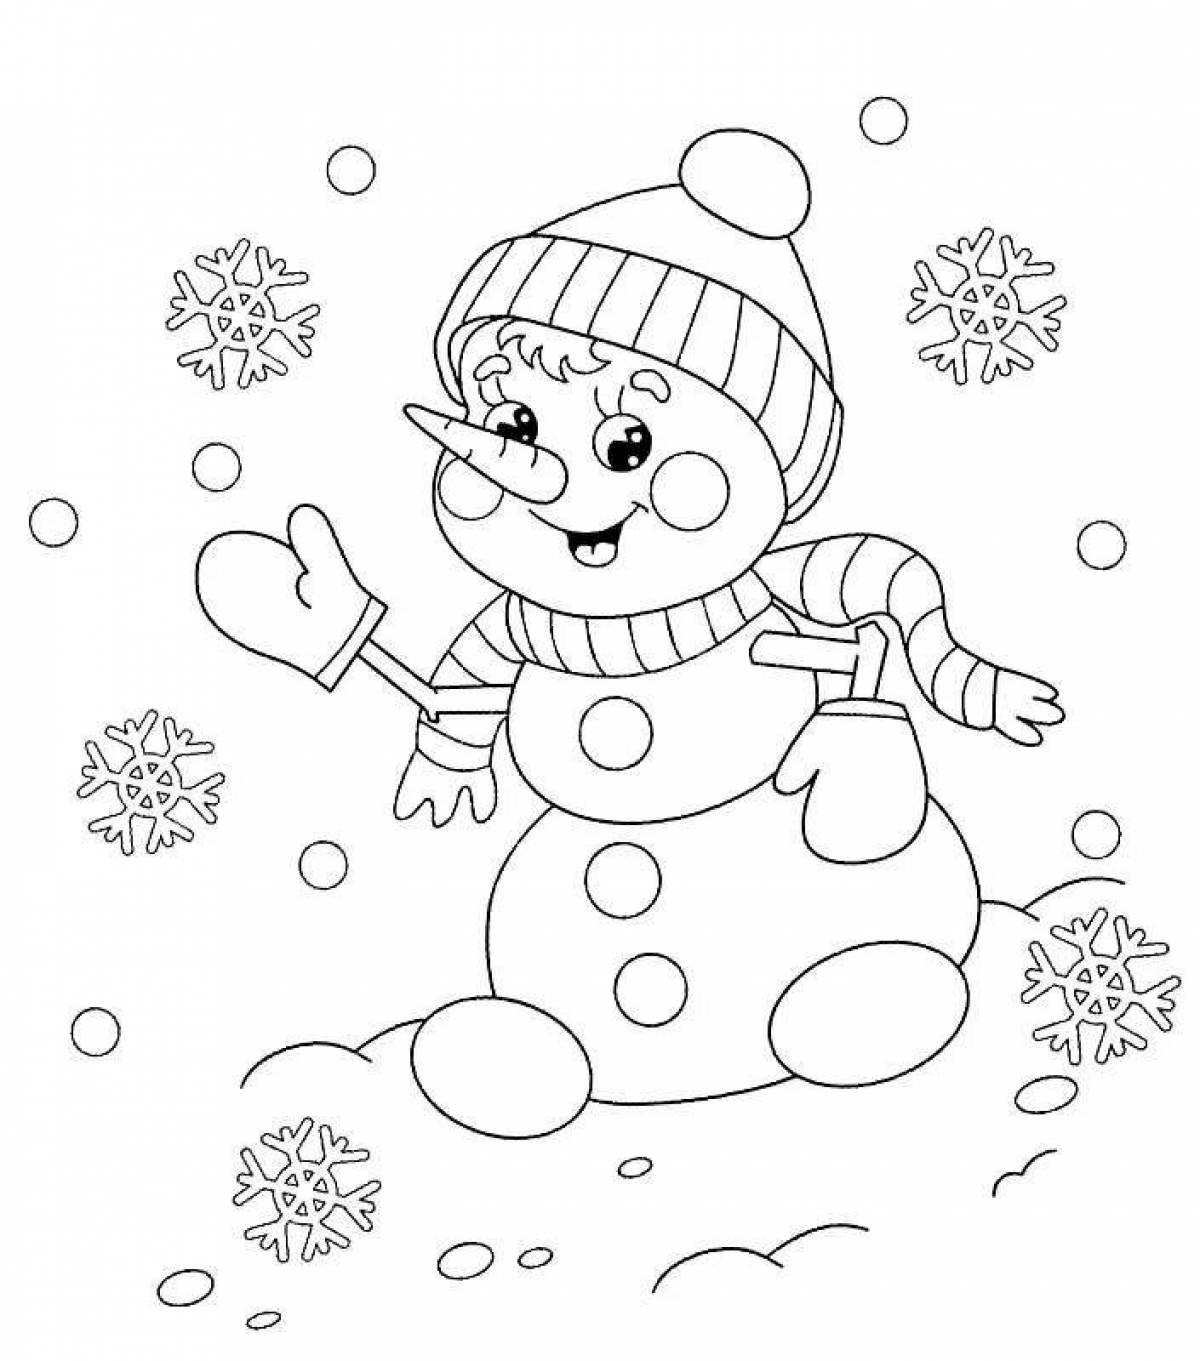 Coloring book funny snowman on skis